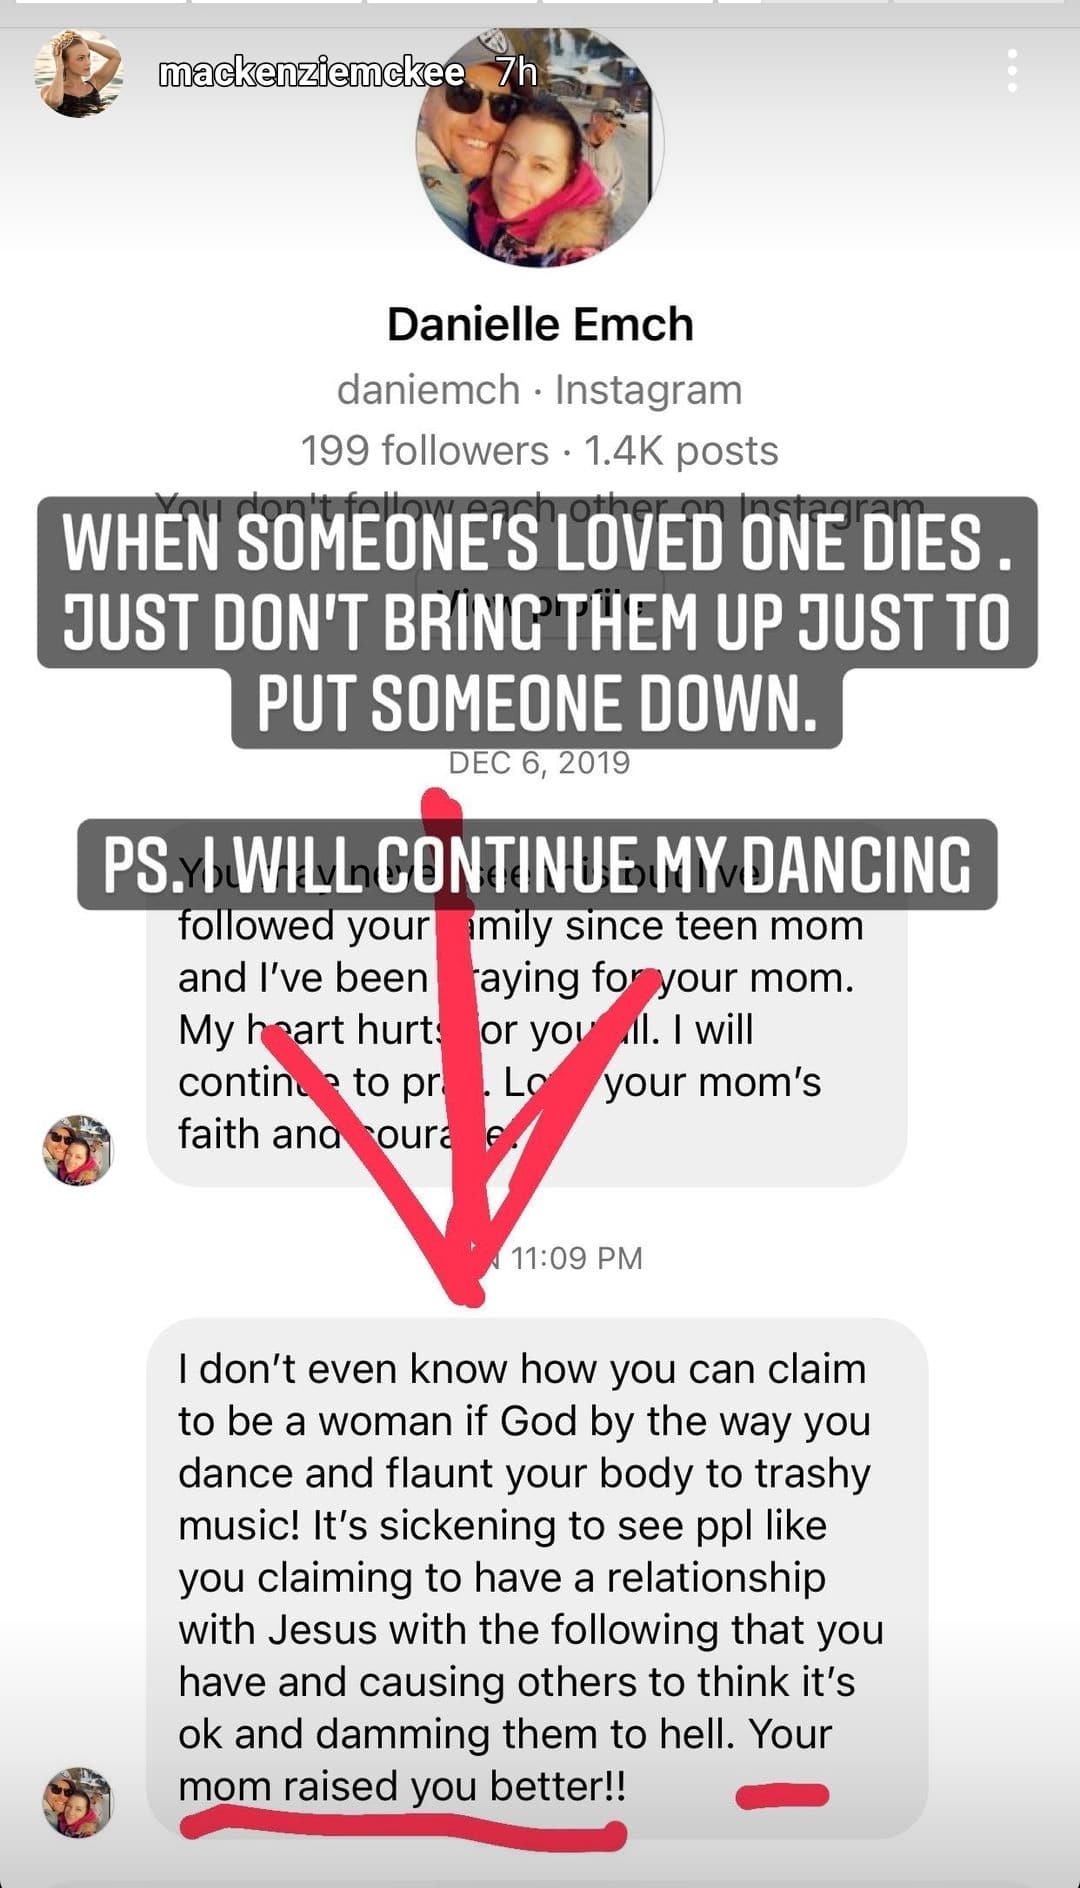 a troll insulted mackenzie mckee in her IG dms